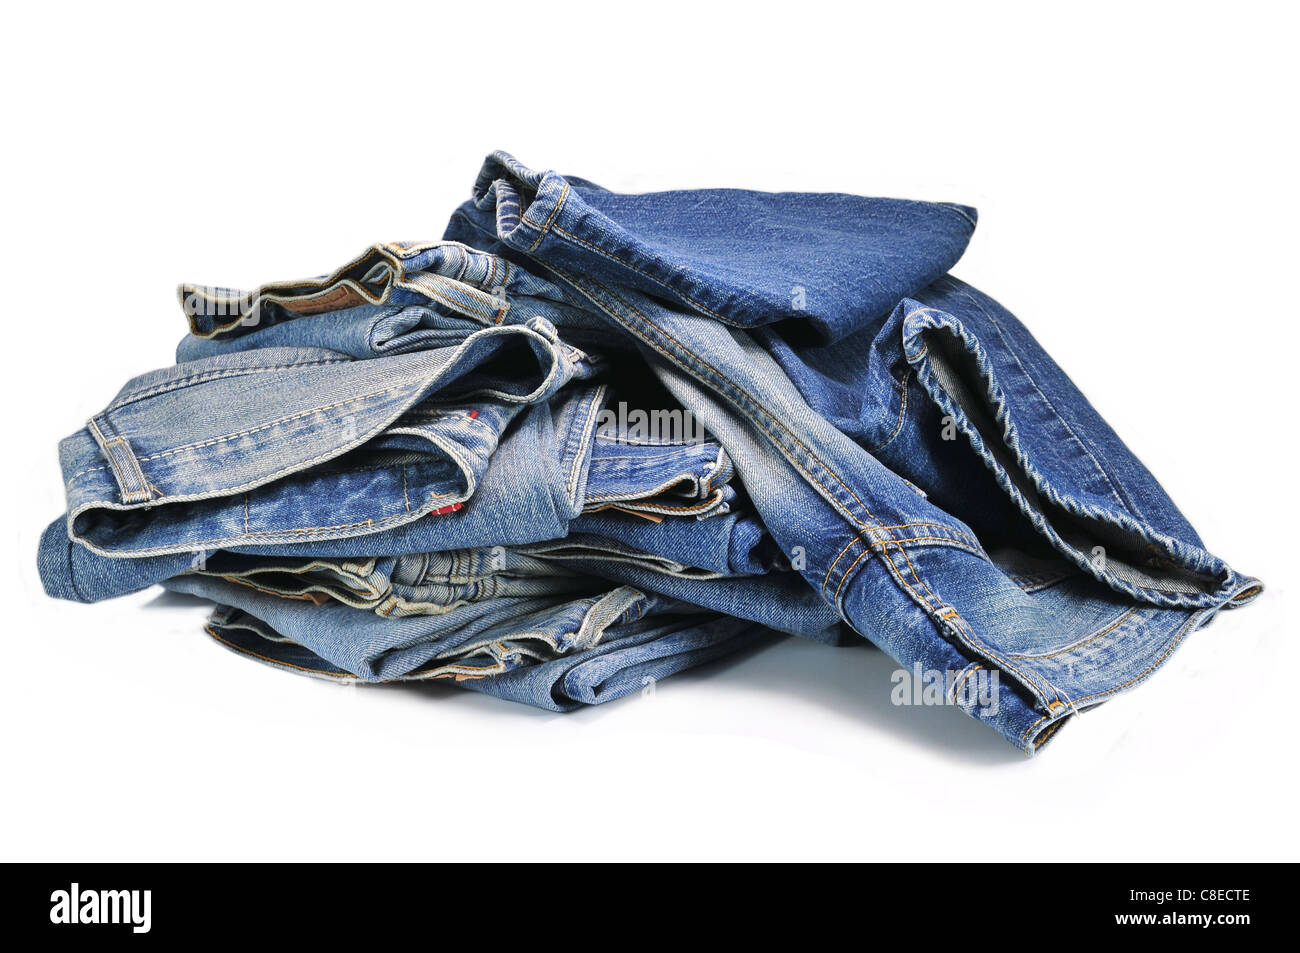 Pile of blue denim jeans isolated on white background Stock Photo - Alamy